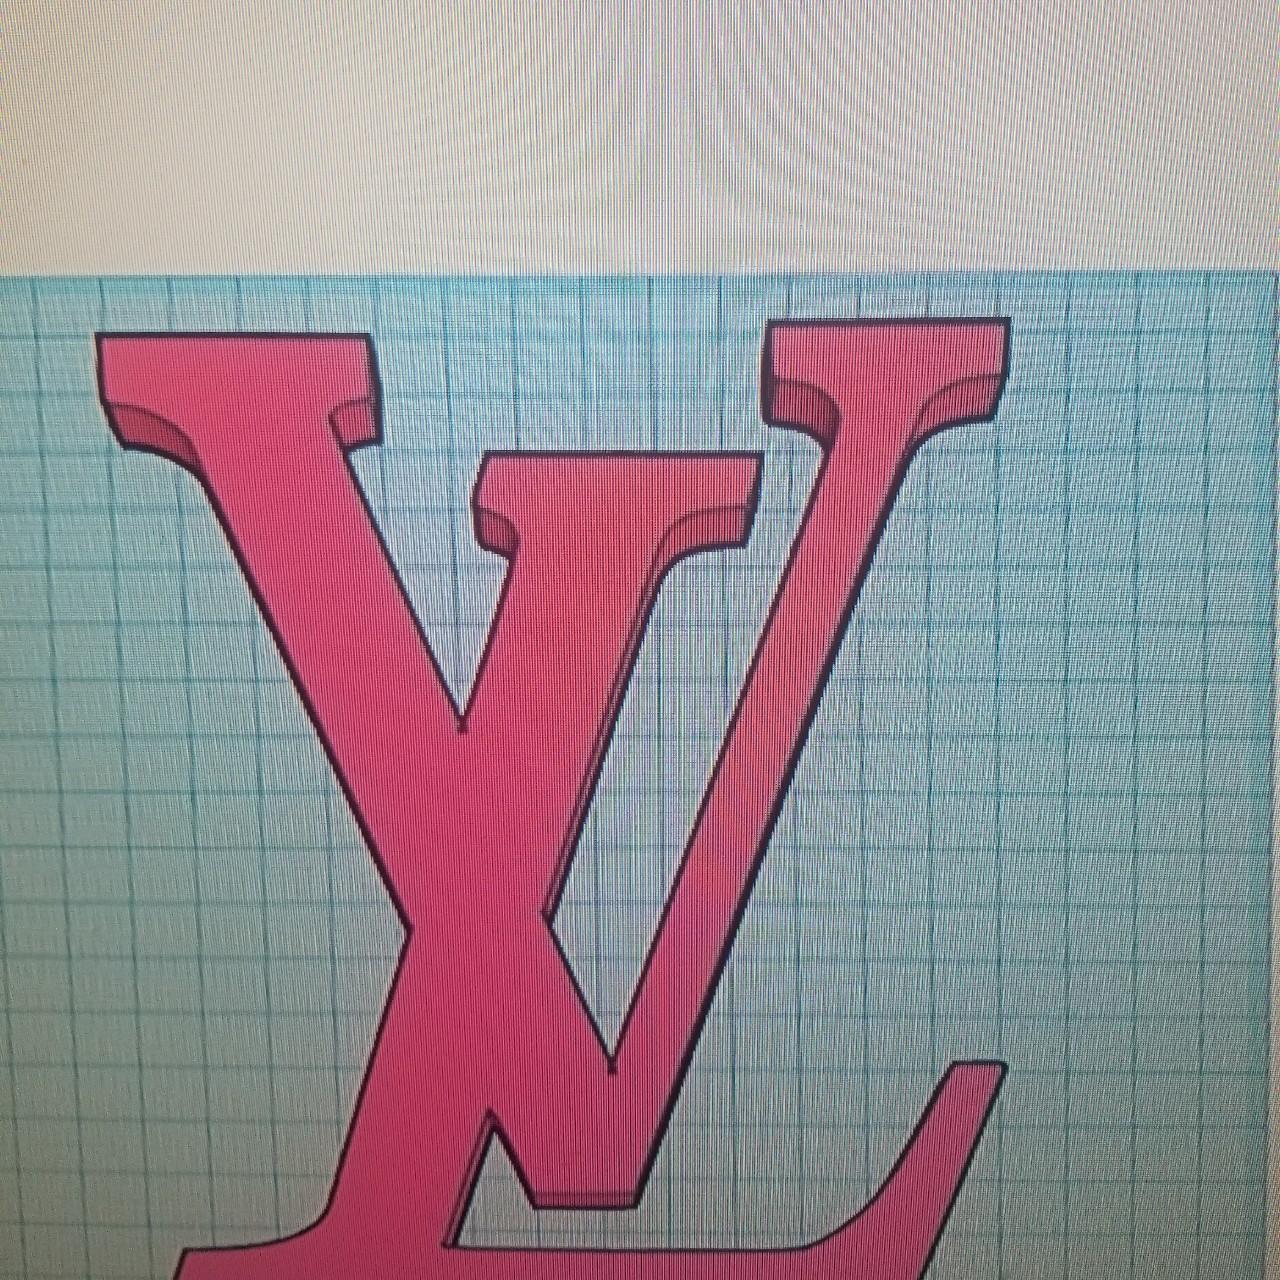 How to draw Louis Vuitton Logo step by step easily 